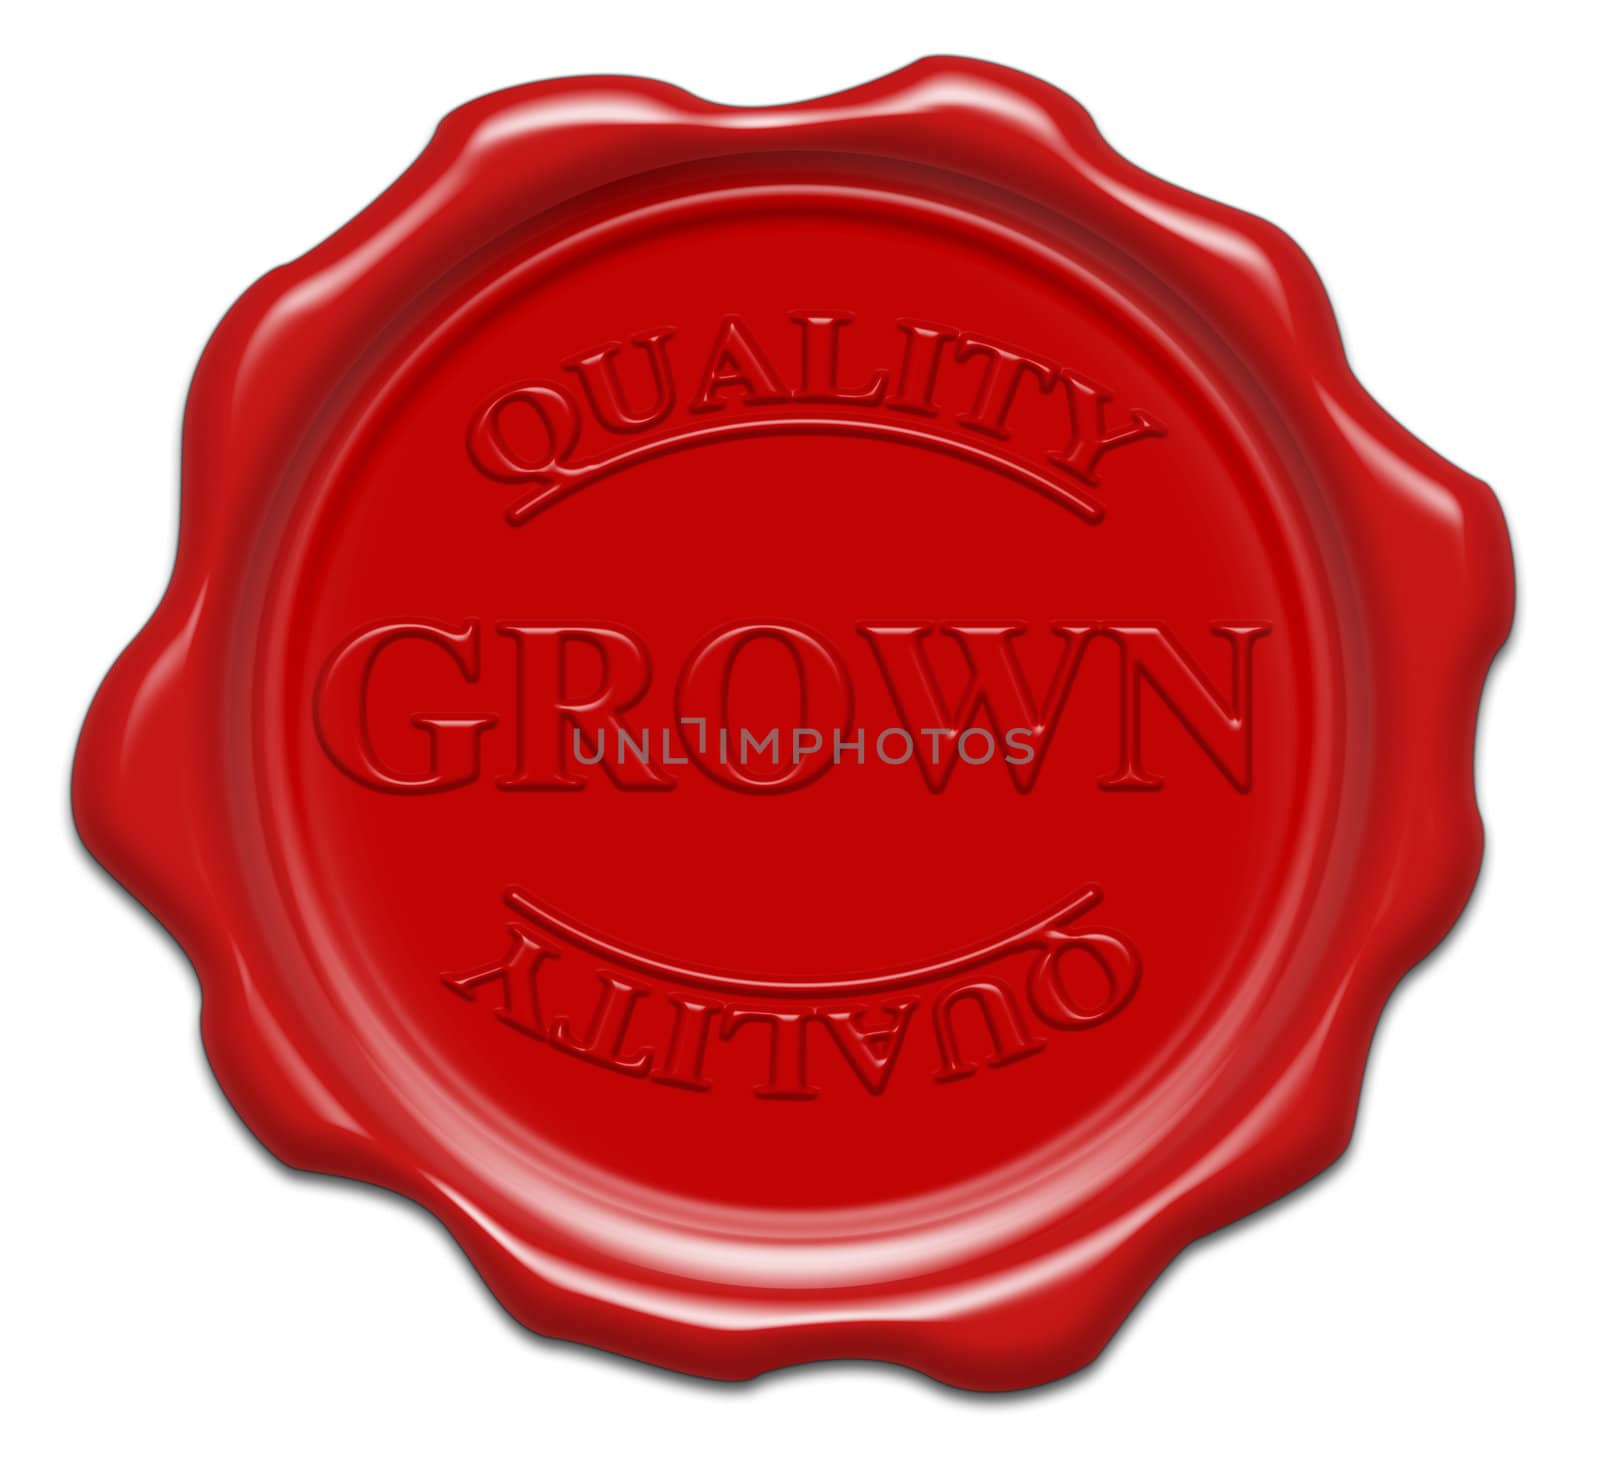 quality grown - illustration red wax seal isolated on white back by mozzyb